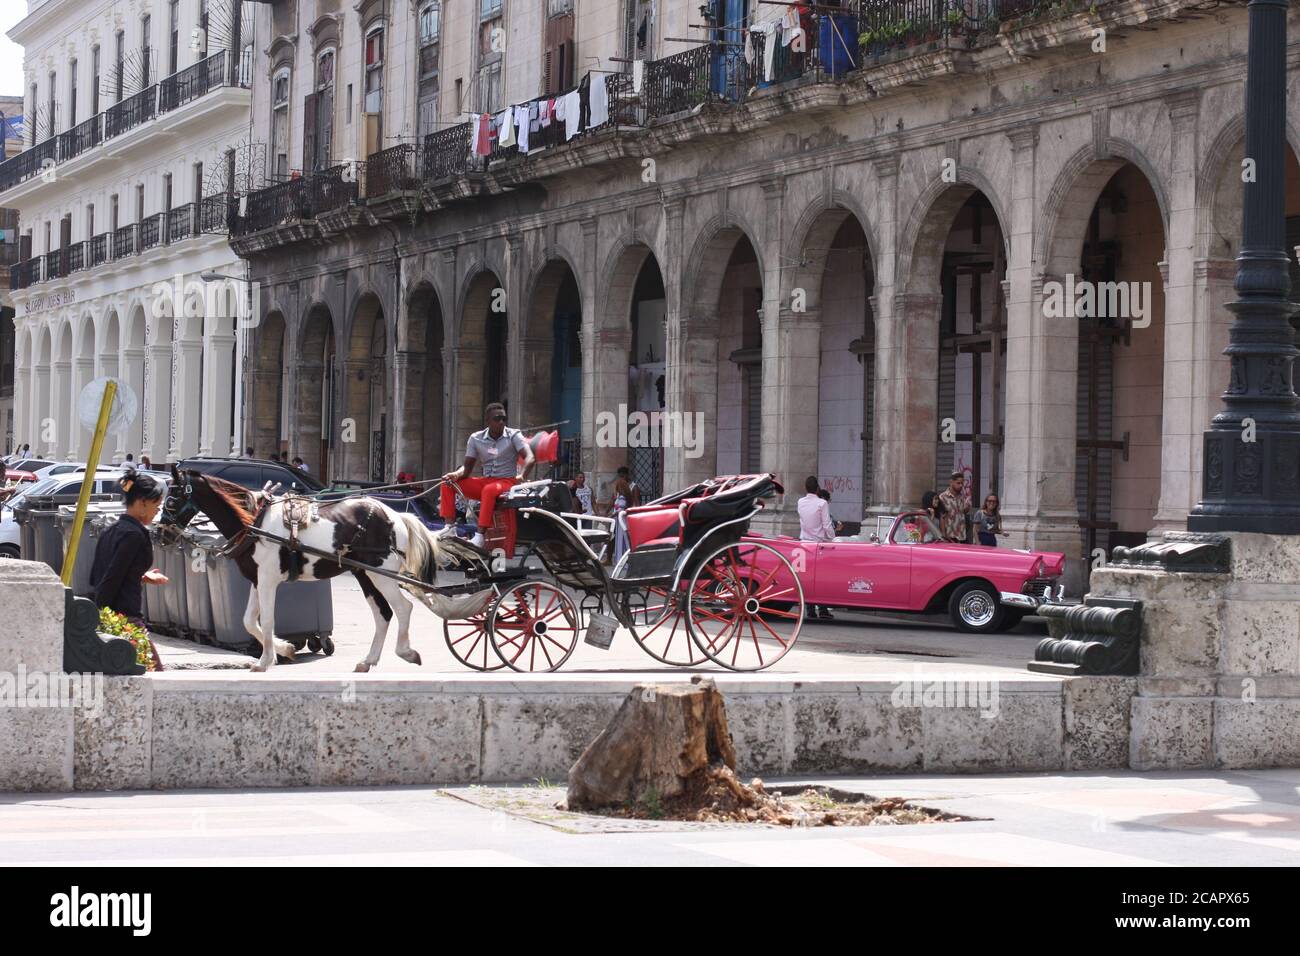 Street scene in Havana, Cuba; horse and carriage and vintage pink car Stock Photo